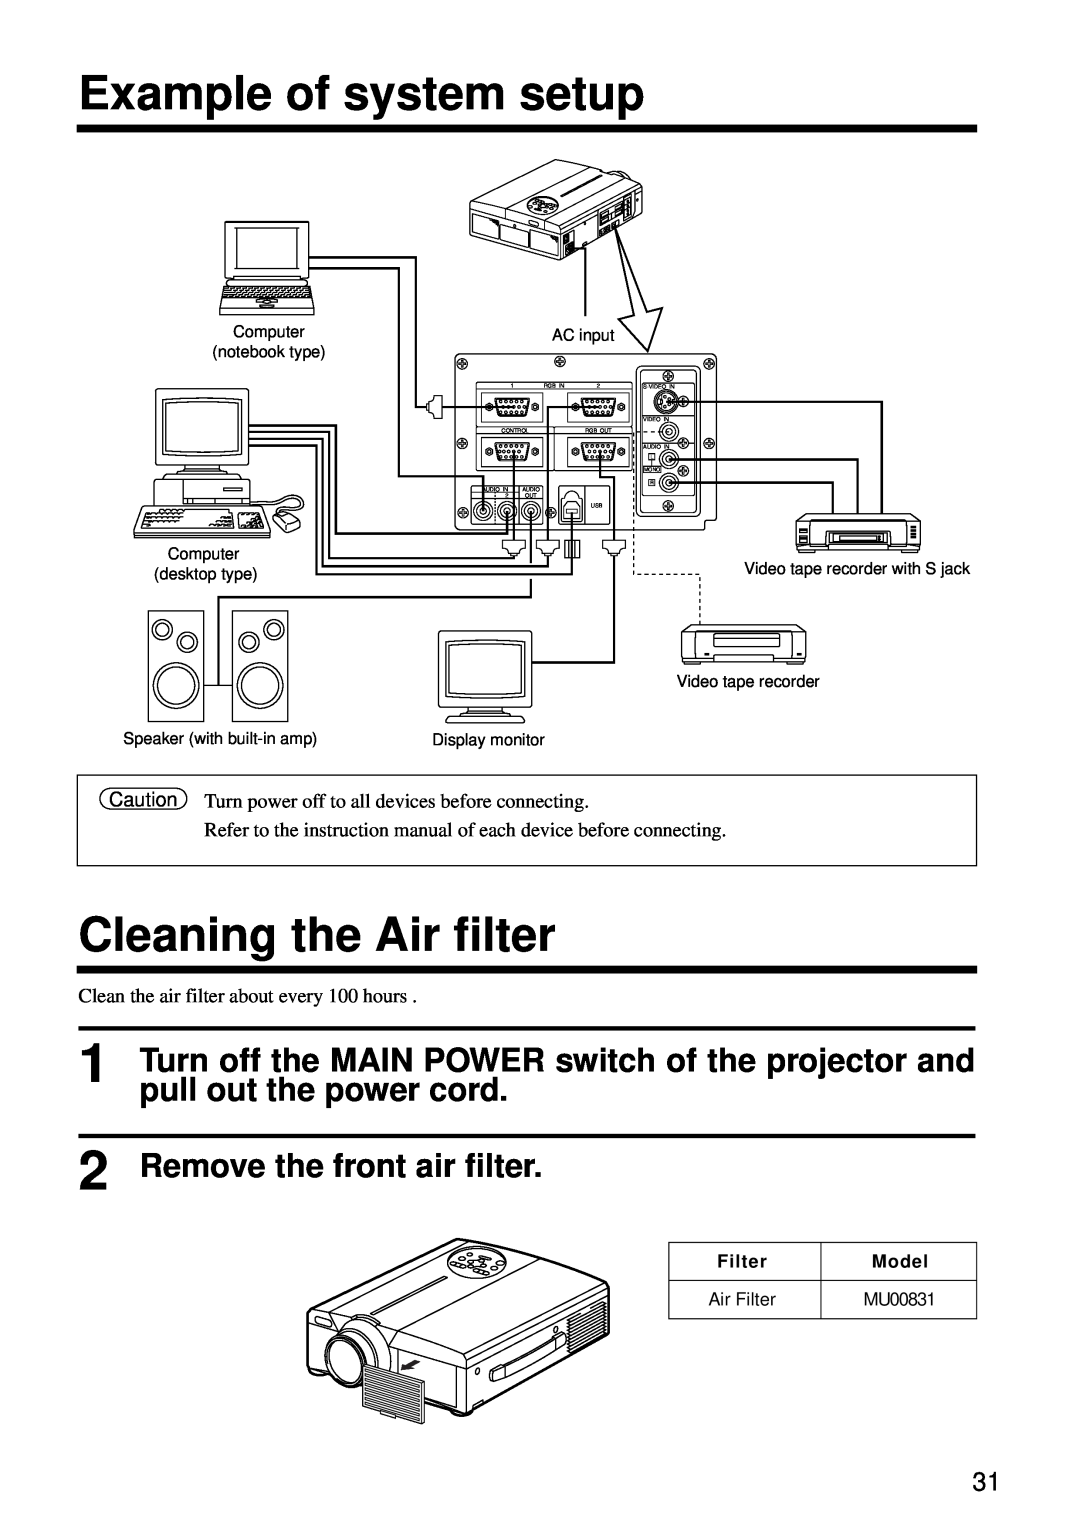 Hitachi CP-S860W Example of system setup, Cleaning the Air filter, pull out the power cord, Remove the front air filter 